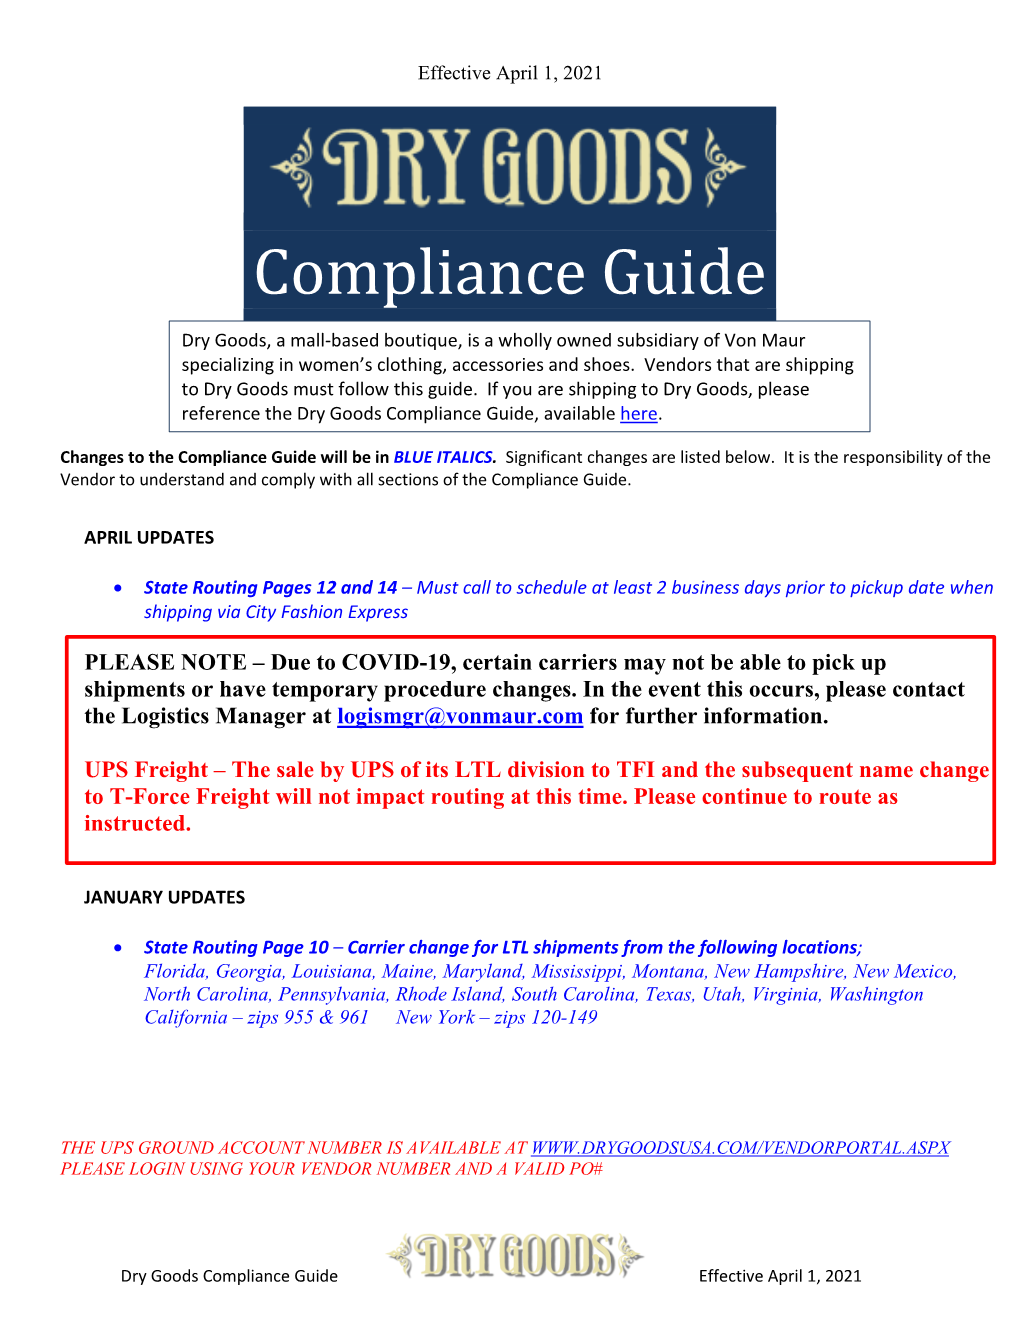 Dry Goods Compliance Guide, Effective April 1, 2021